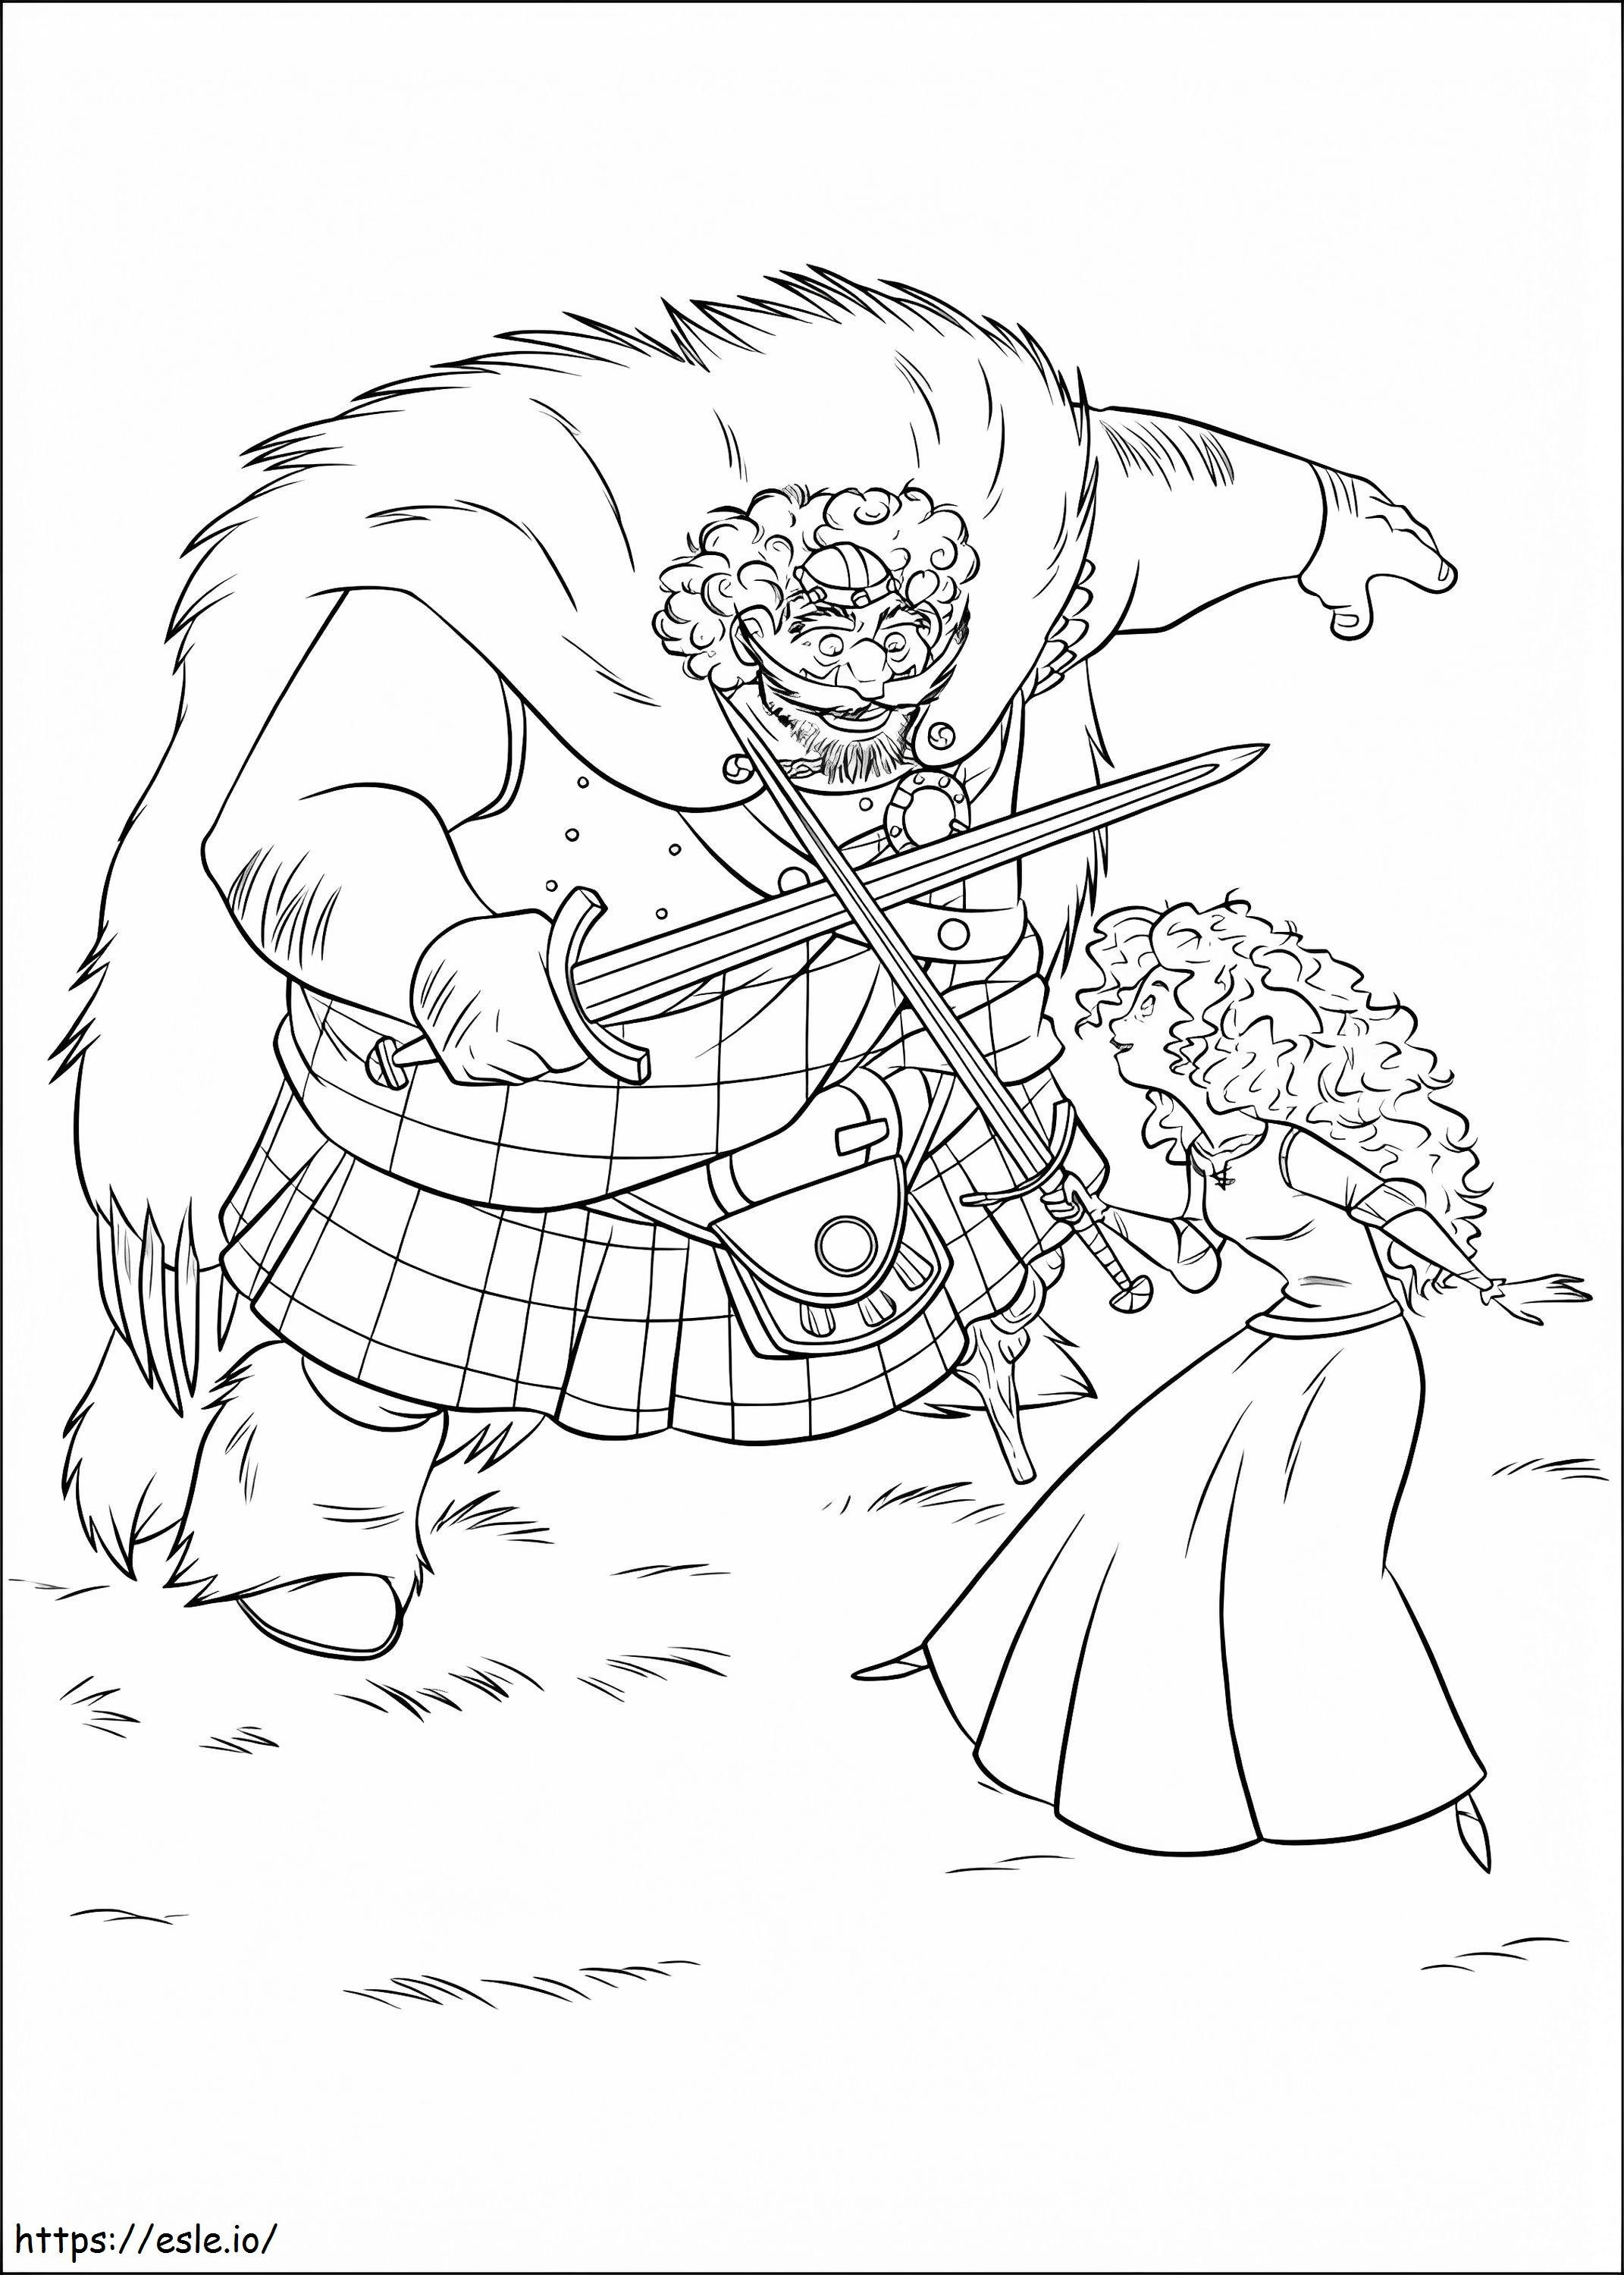 1534218810 Merida Training With King Fergus A4 coloring page